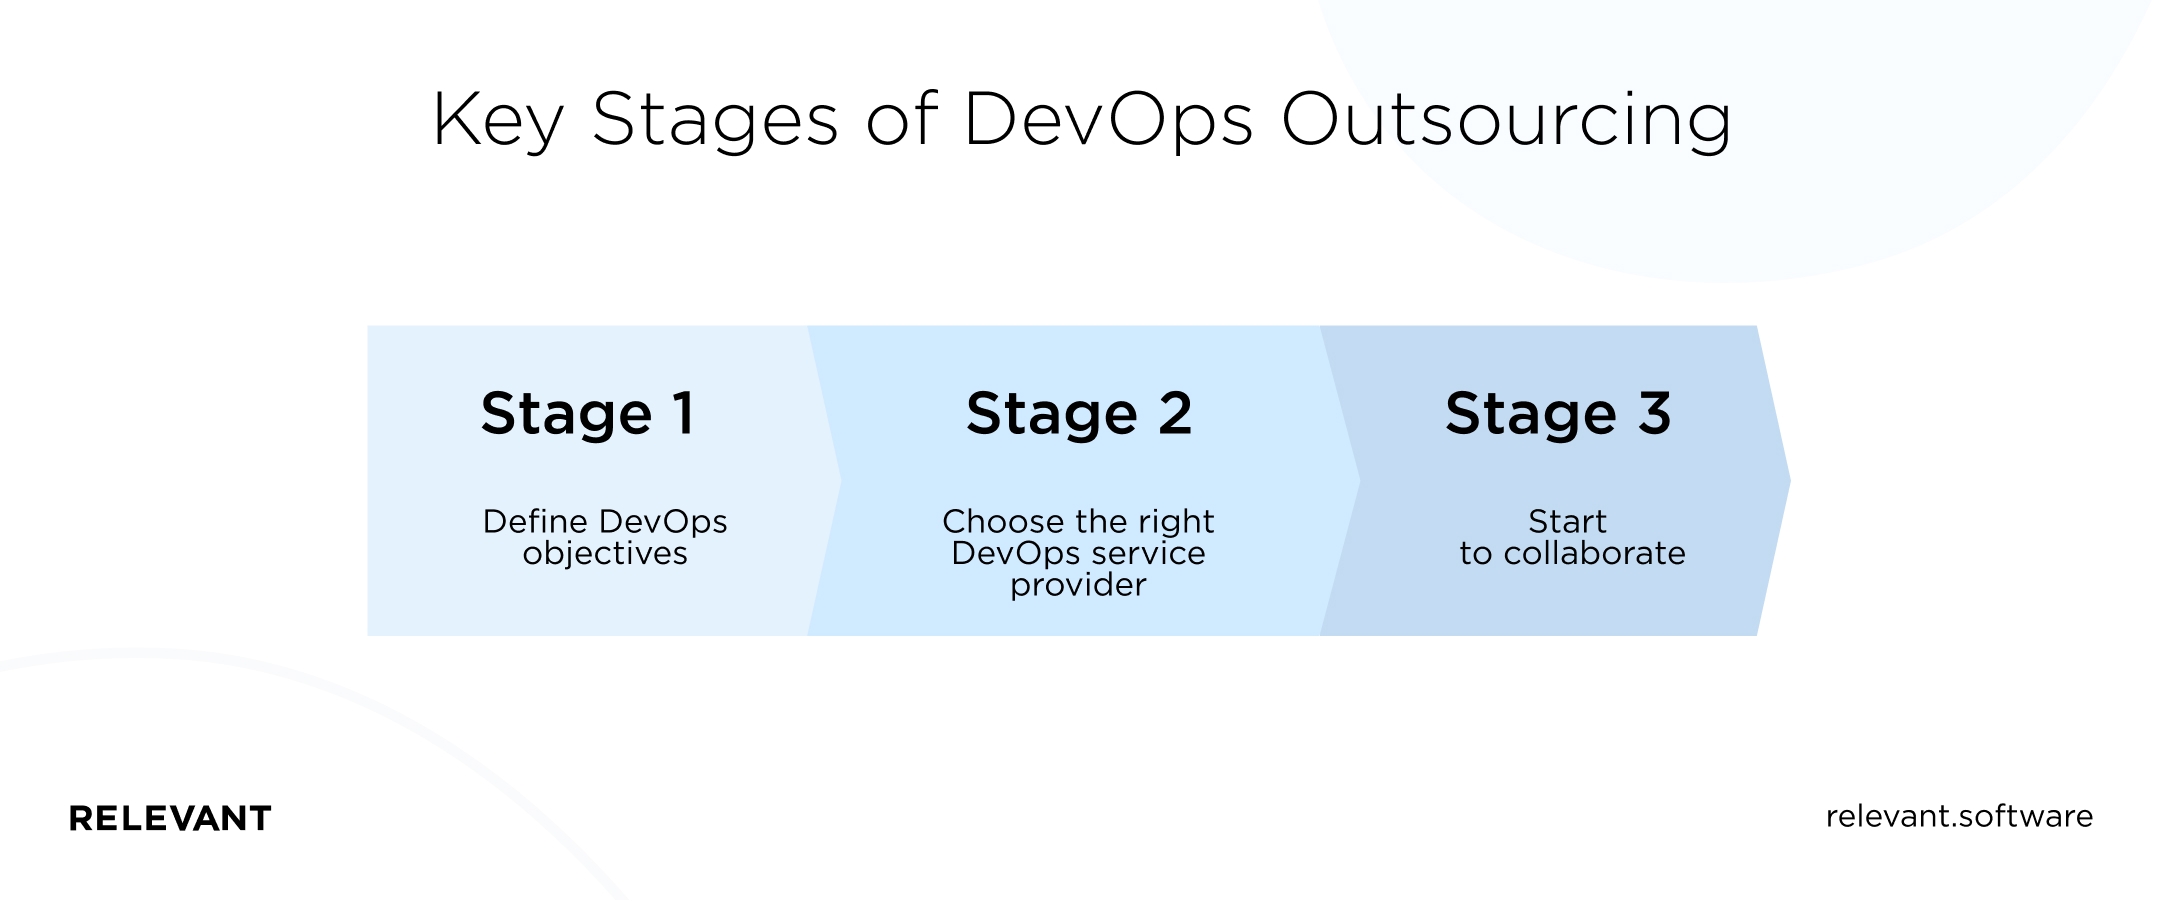 Key Stages of DevOps Outsourcing